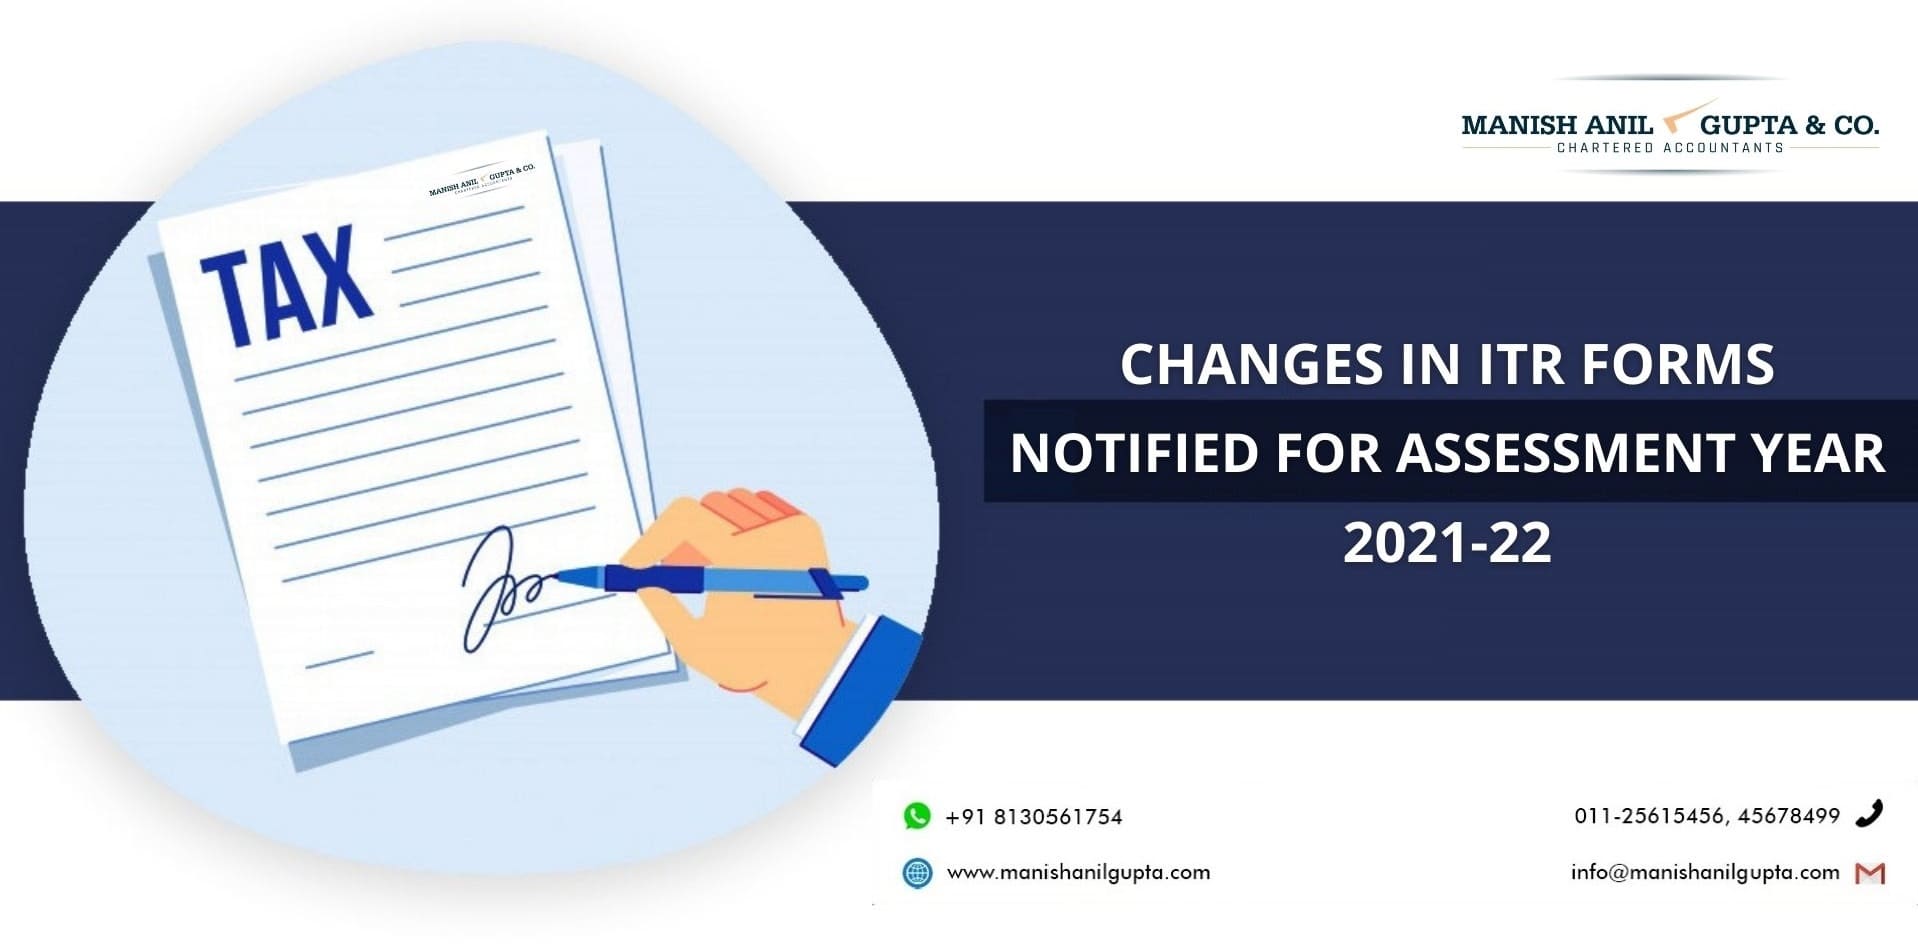 Changes in ITR forms notified for Assessment Year 2021-22